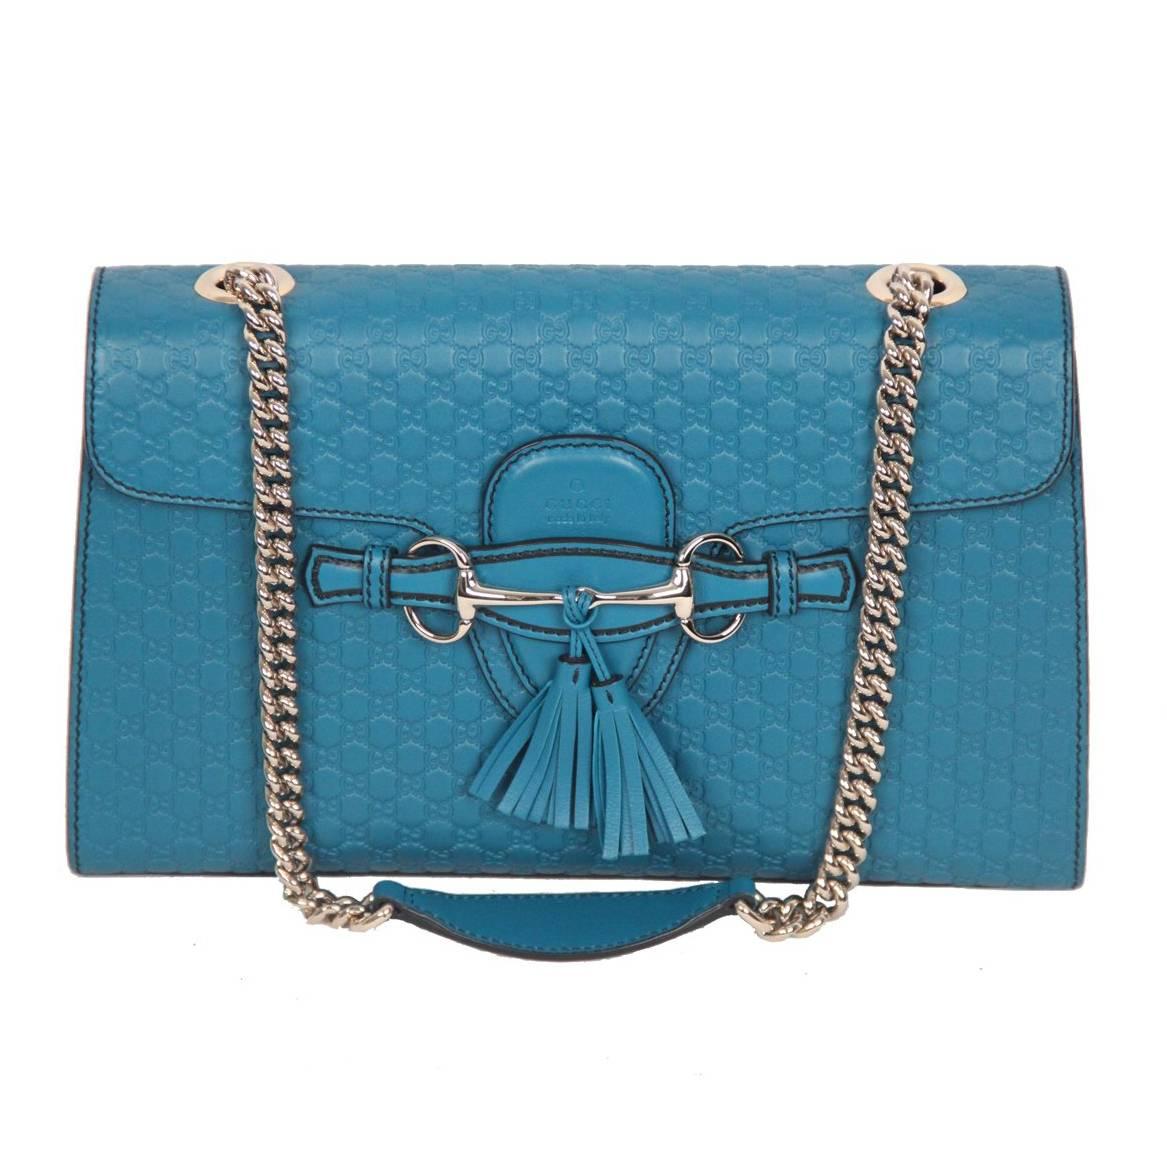 GUCCI Turquoise MICROGUCCISSIMA Leather EMILY Shoulder Bag